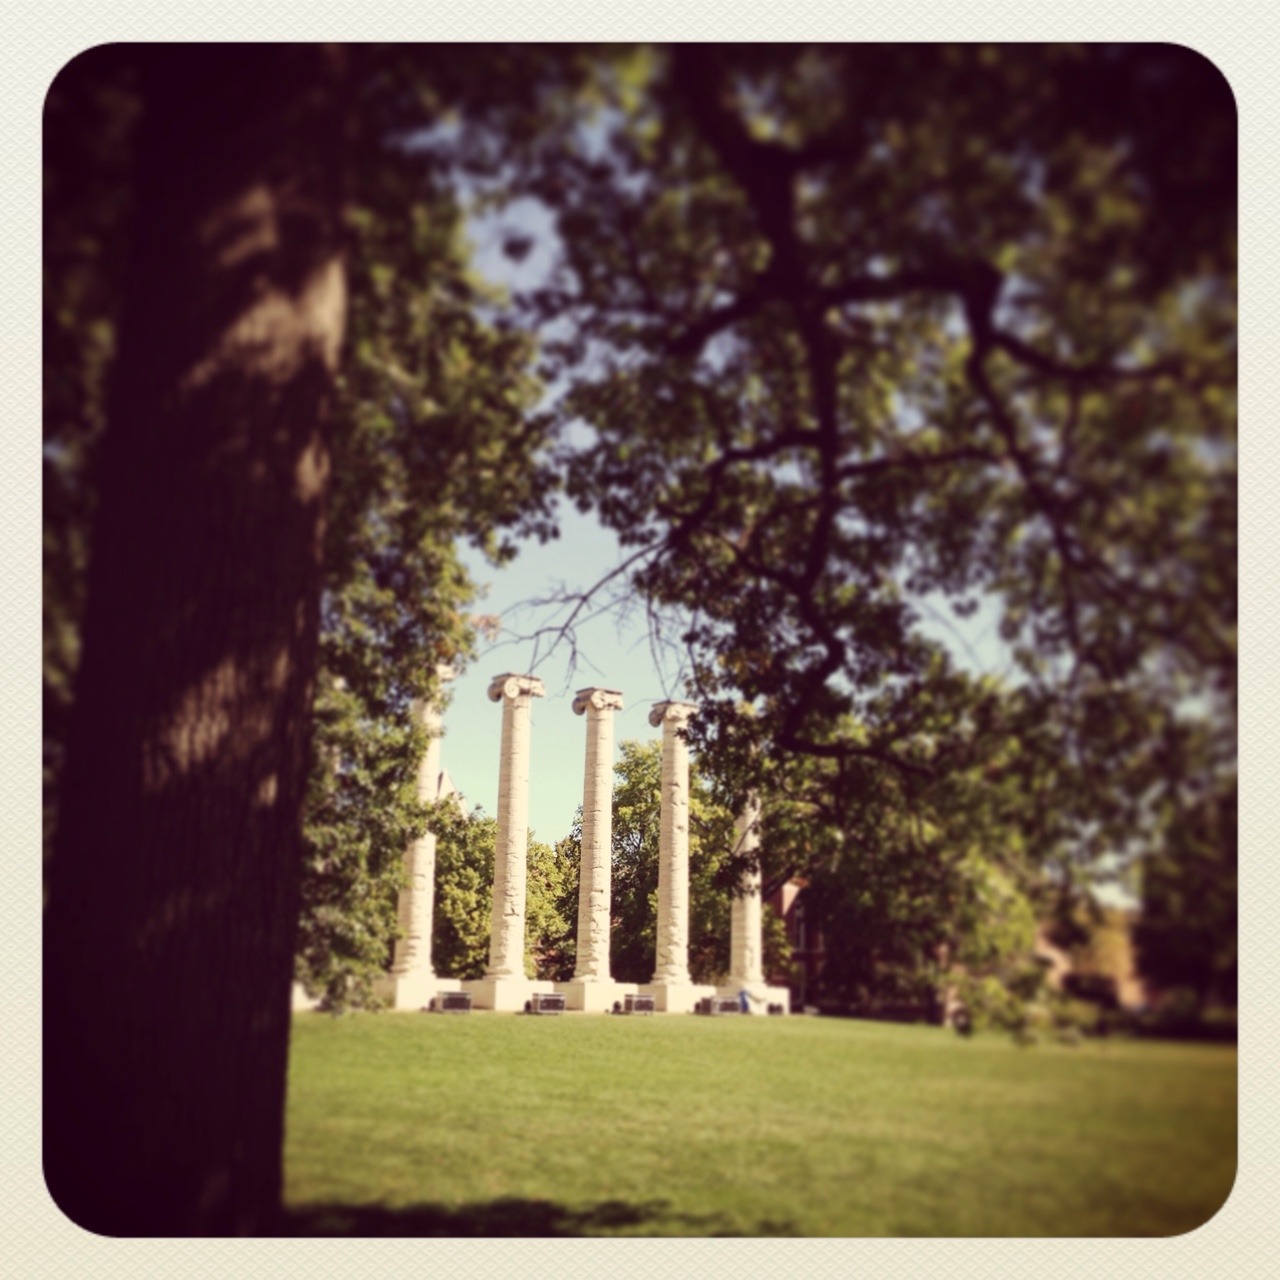 Most peaceful place on earth? #mizzou #quad #myphotos